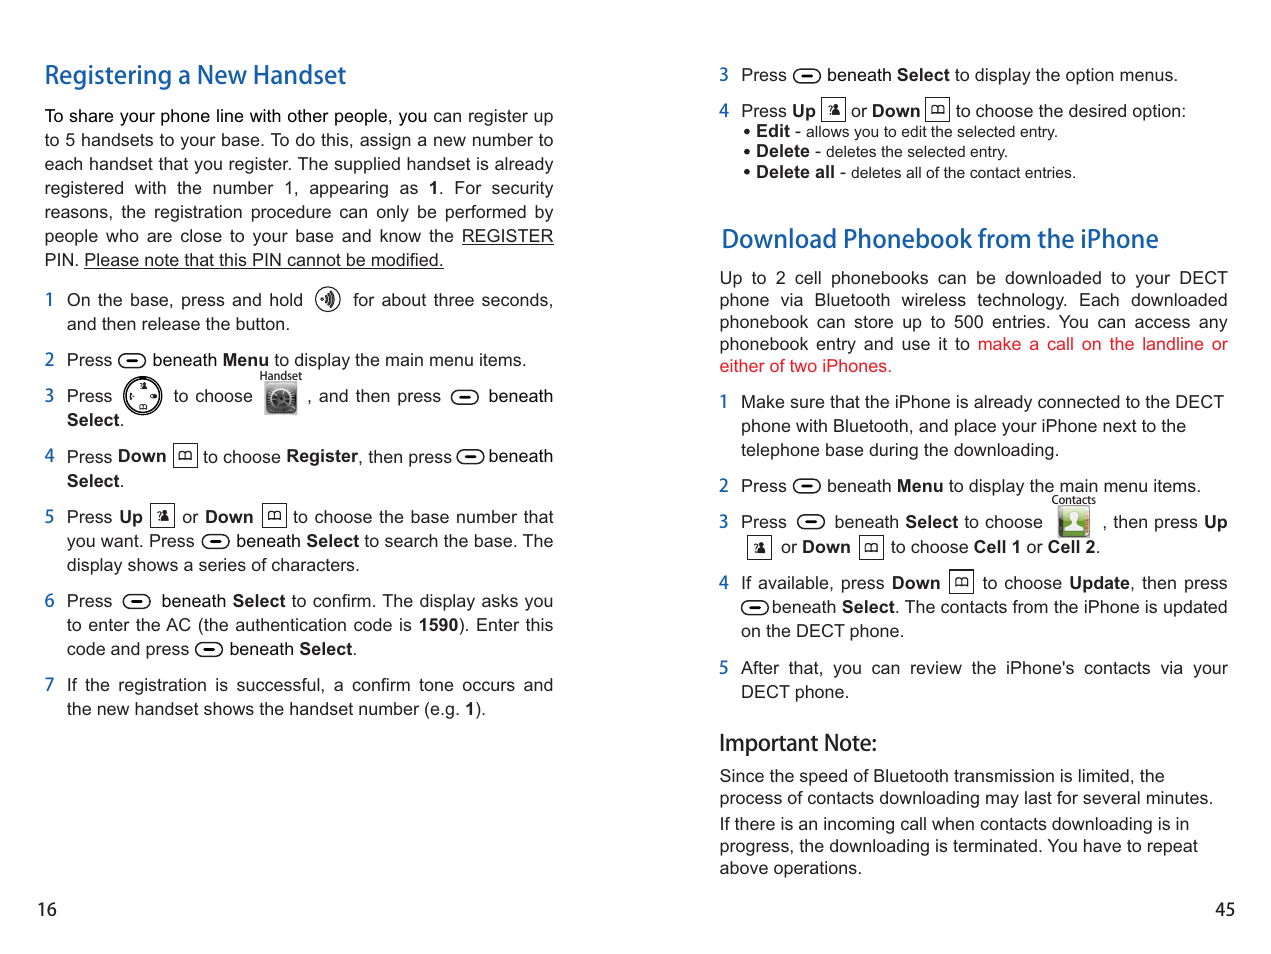 Registering a new handset, Download phonebook from the iphone | iCreation i-700 User Manual | Page 46 / 62